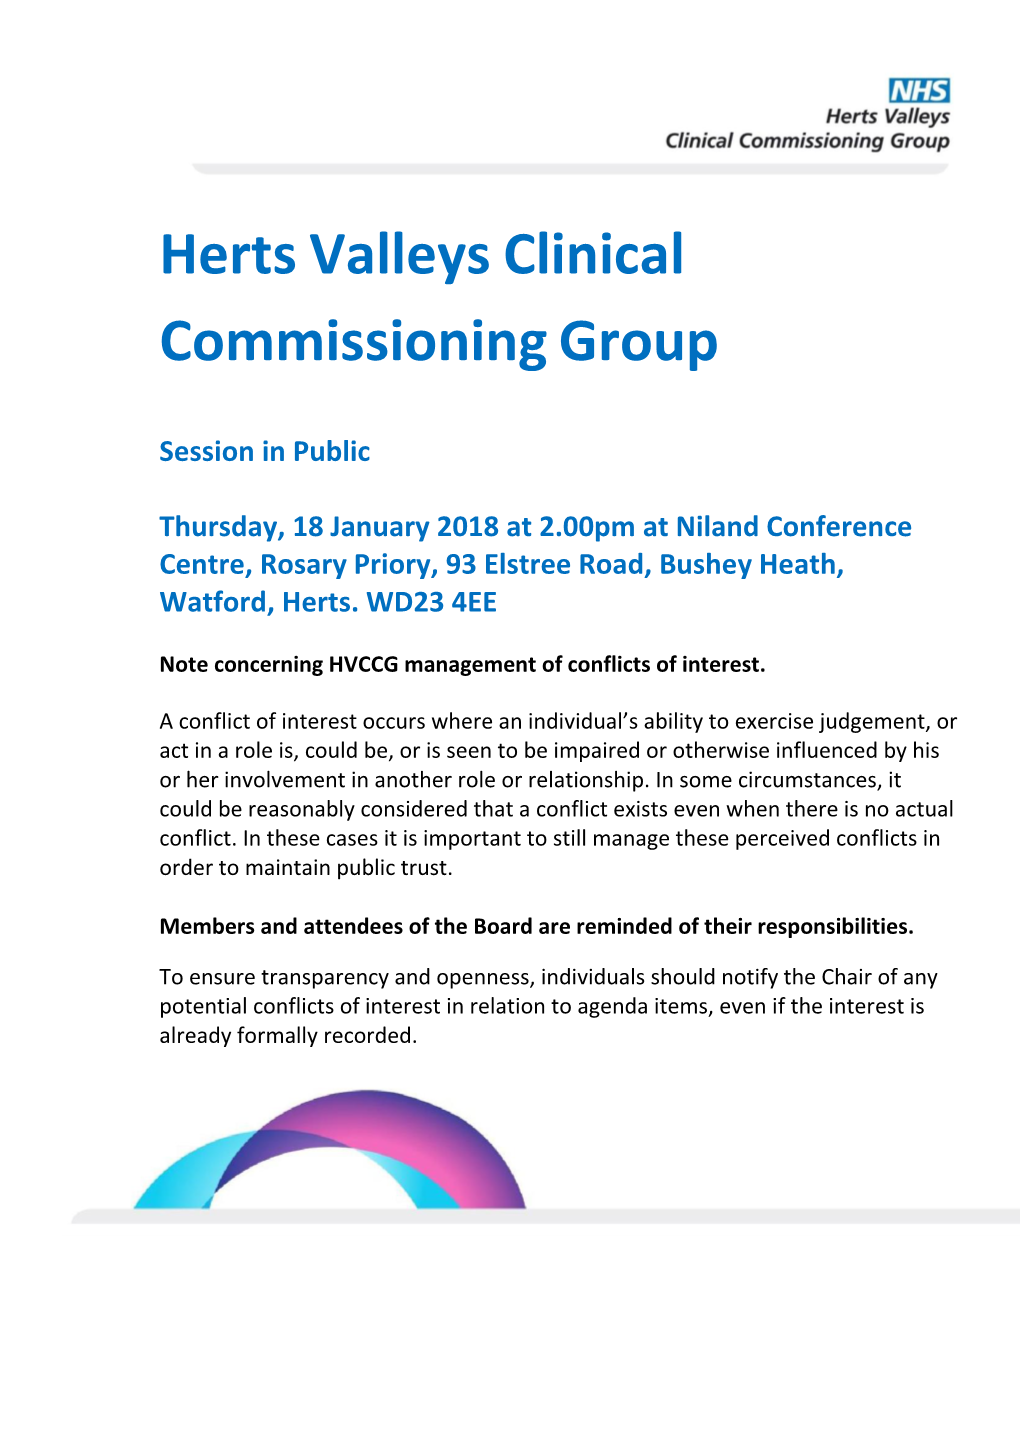 Herts Valleys Clinical Commissioning Group